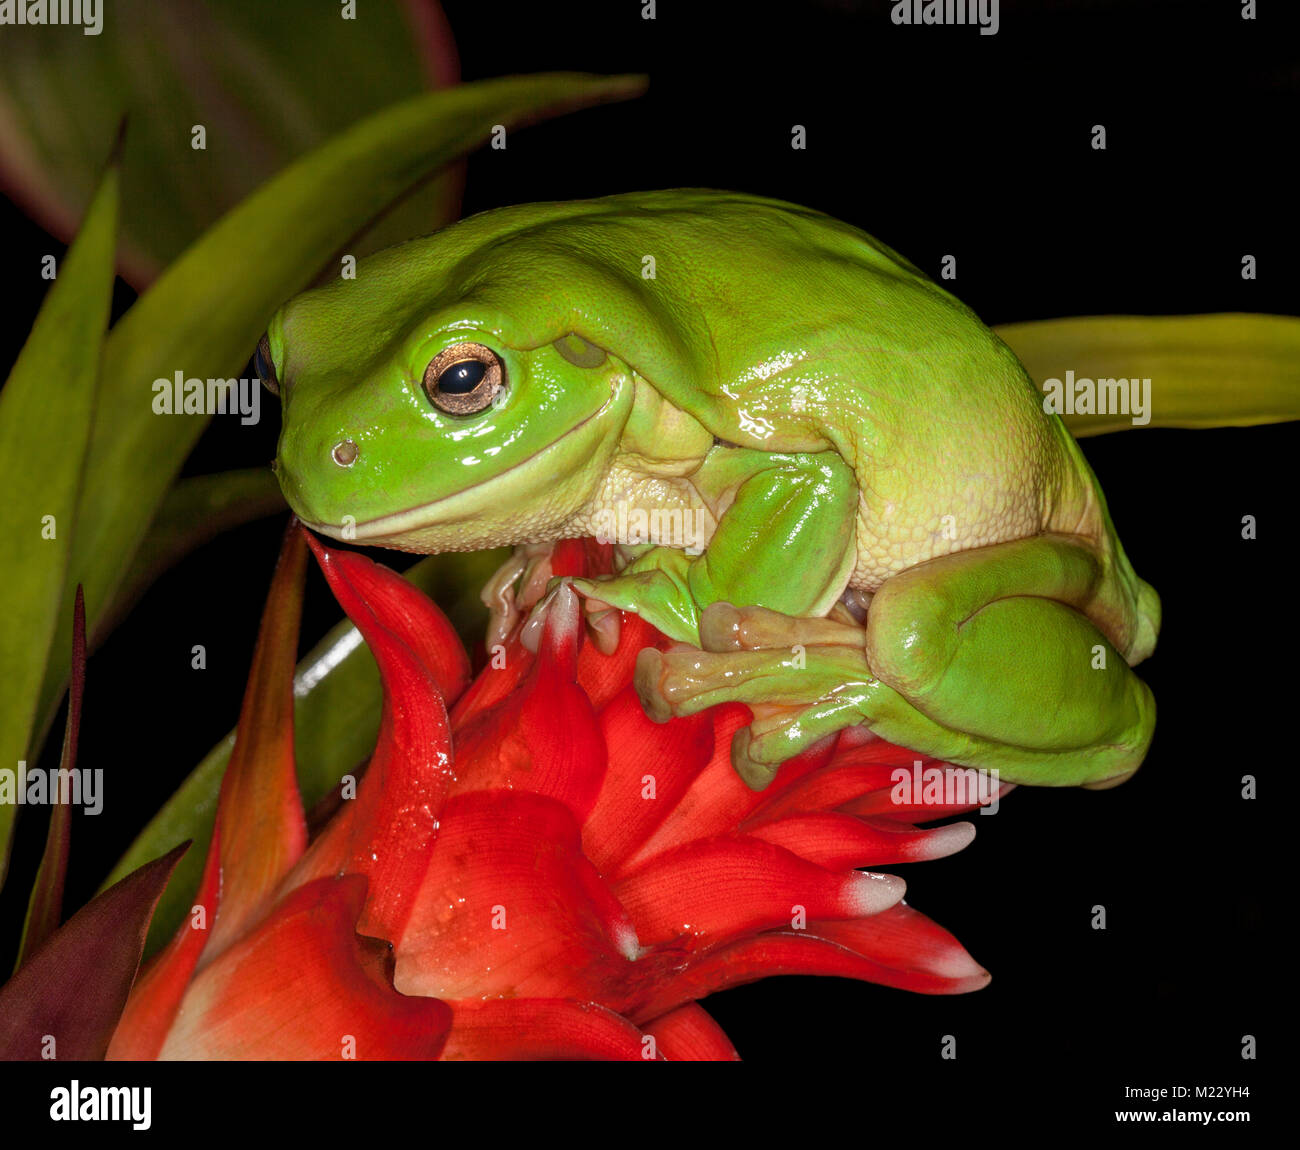 Vivid green Australian tree frog, Litoria caerulea, with wide grin on face, sitting on red flower of bromeliad (Guzmania), against dark background Stock Photo